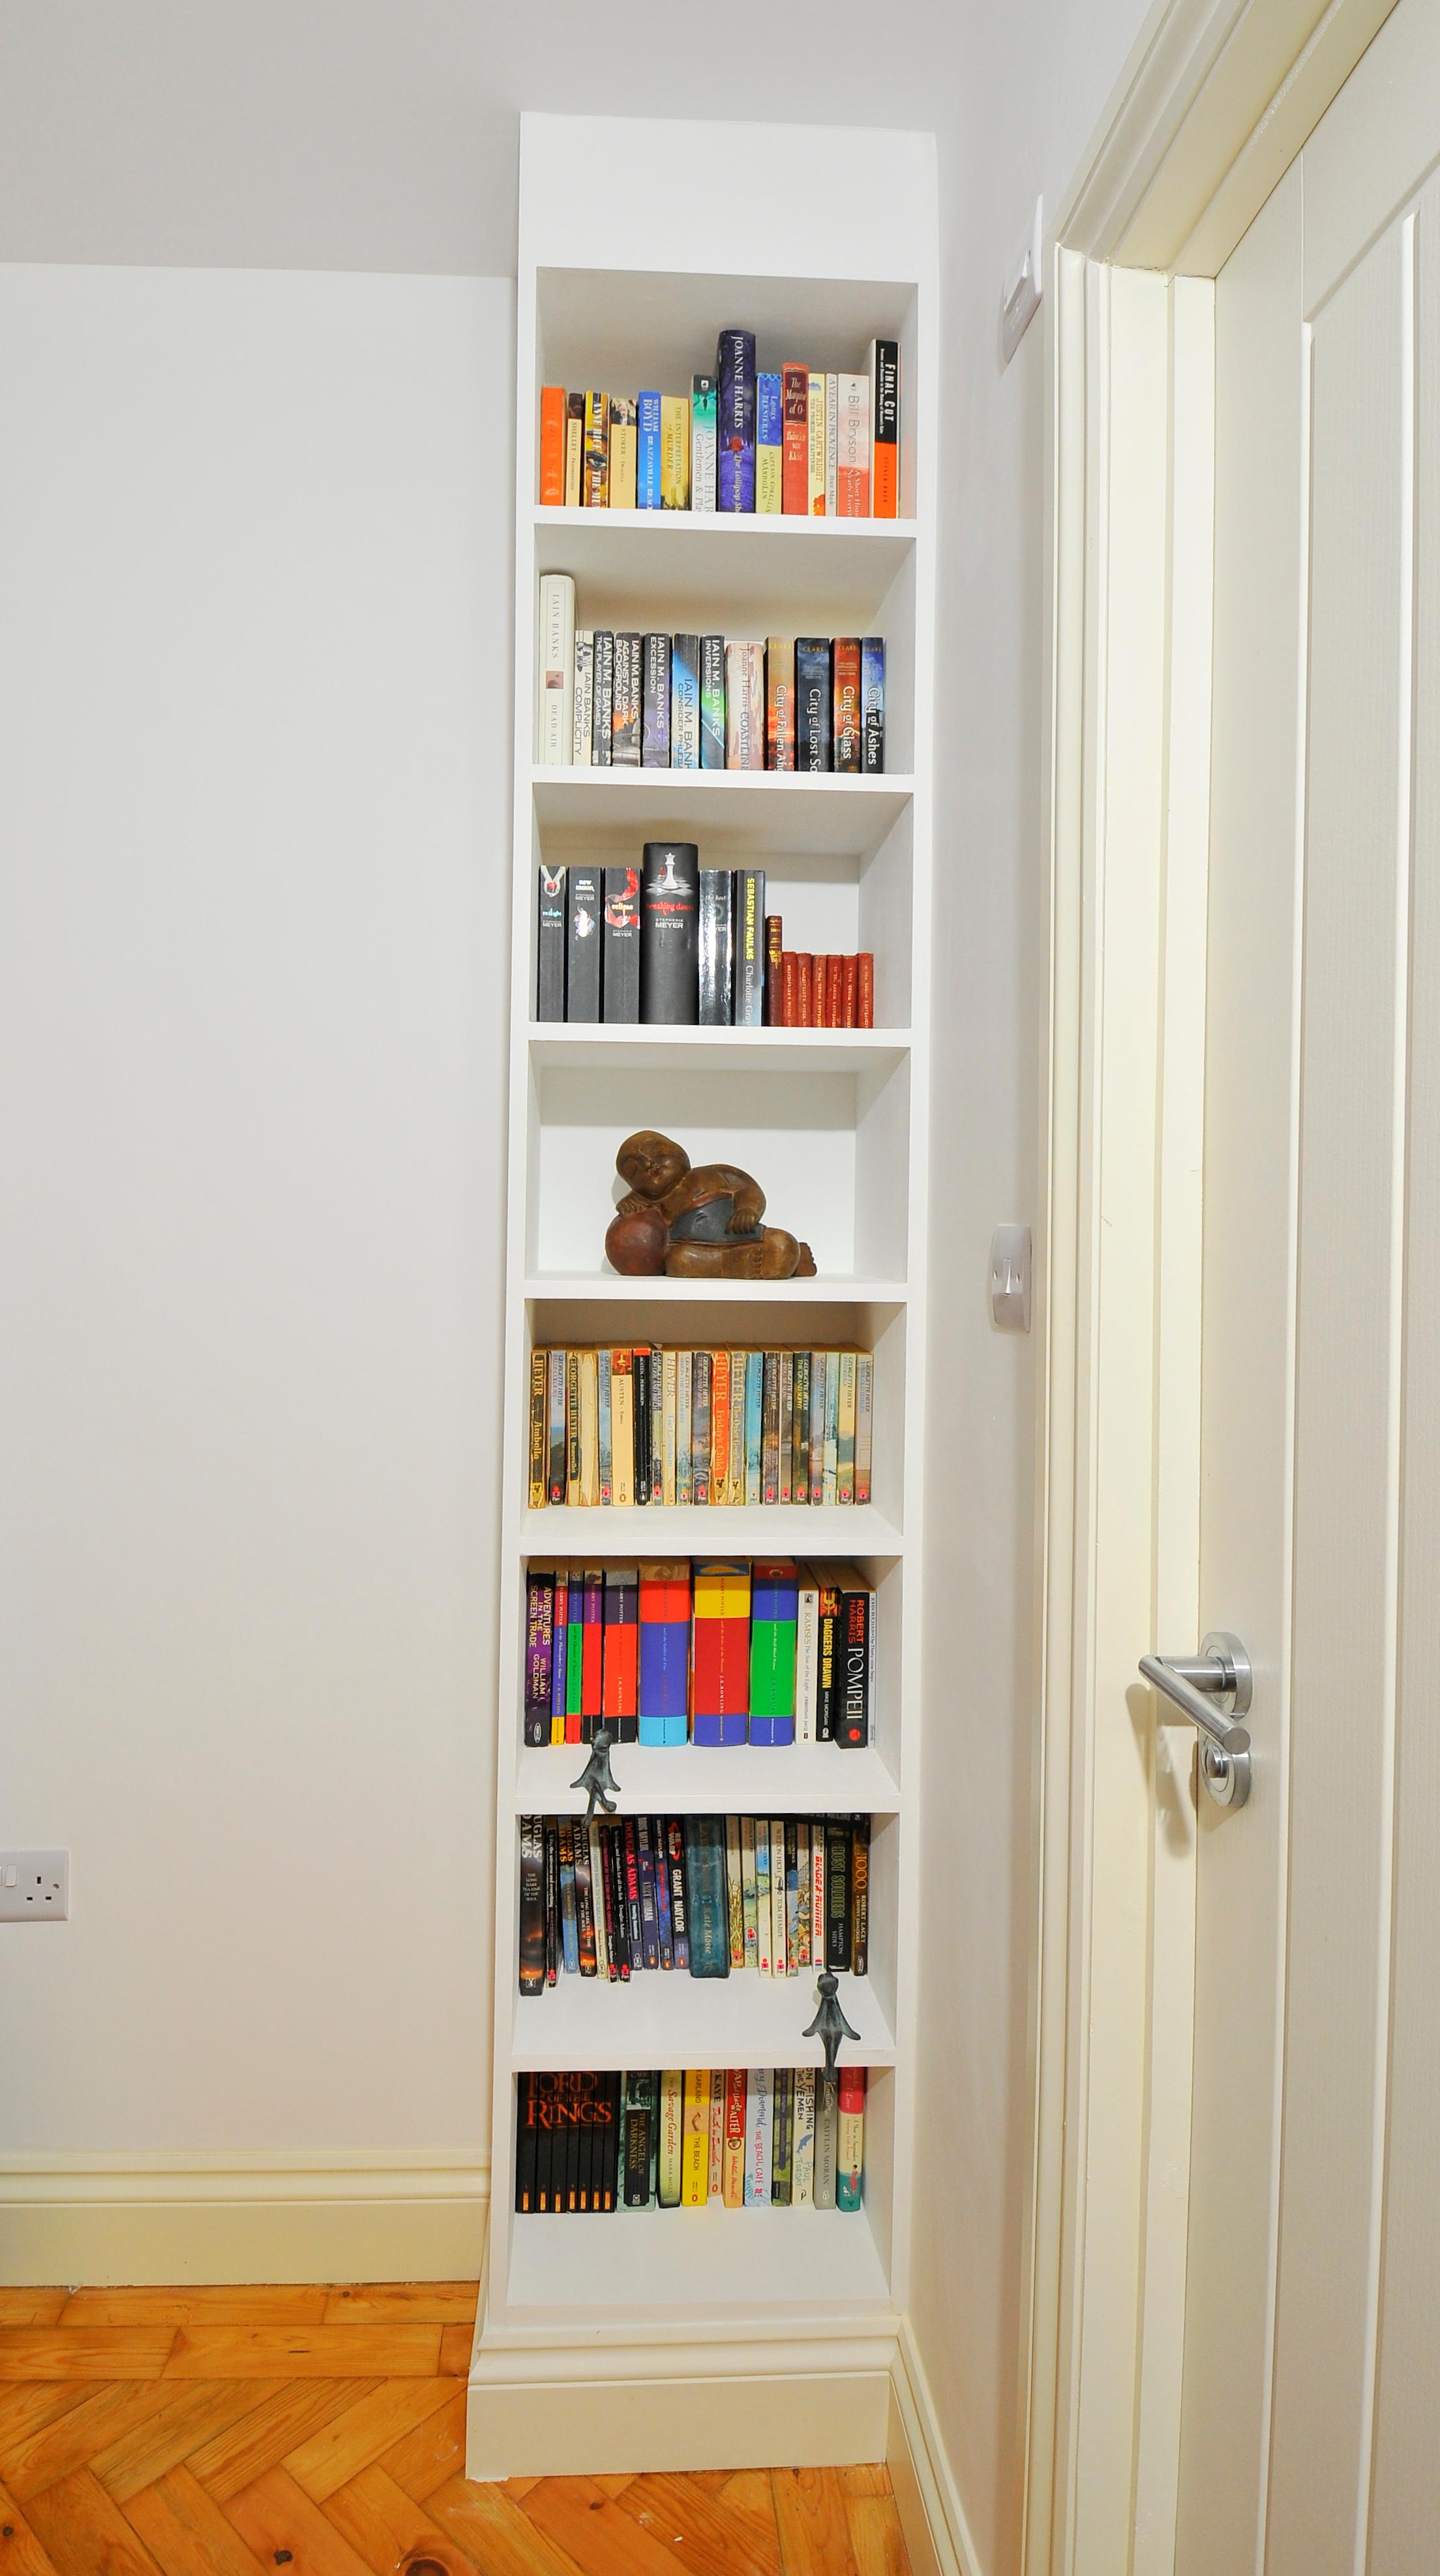 Hide existing pipework and create shelving